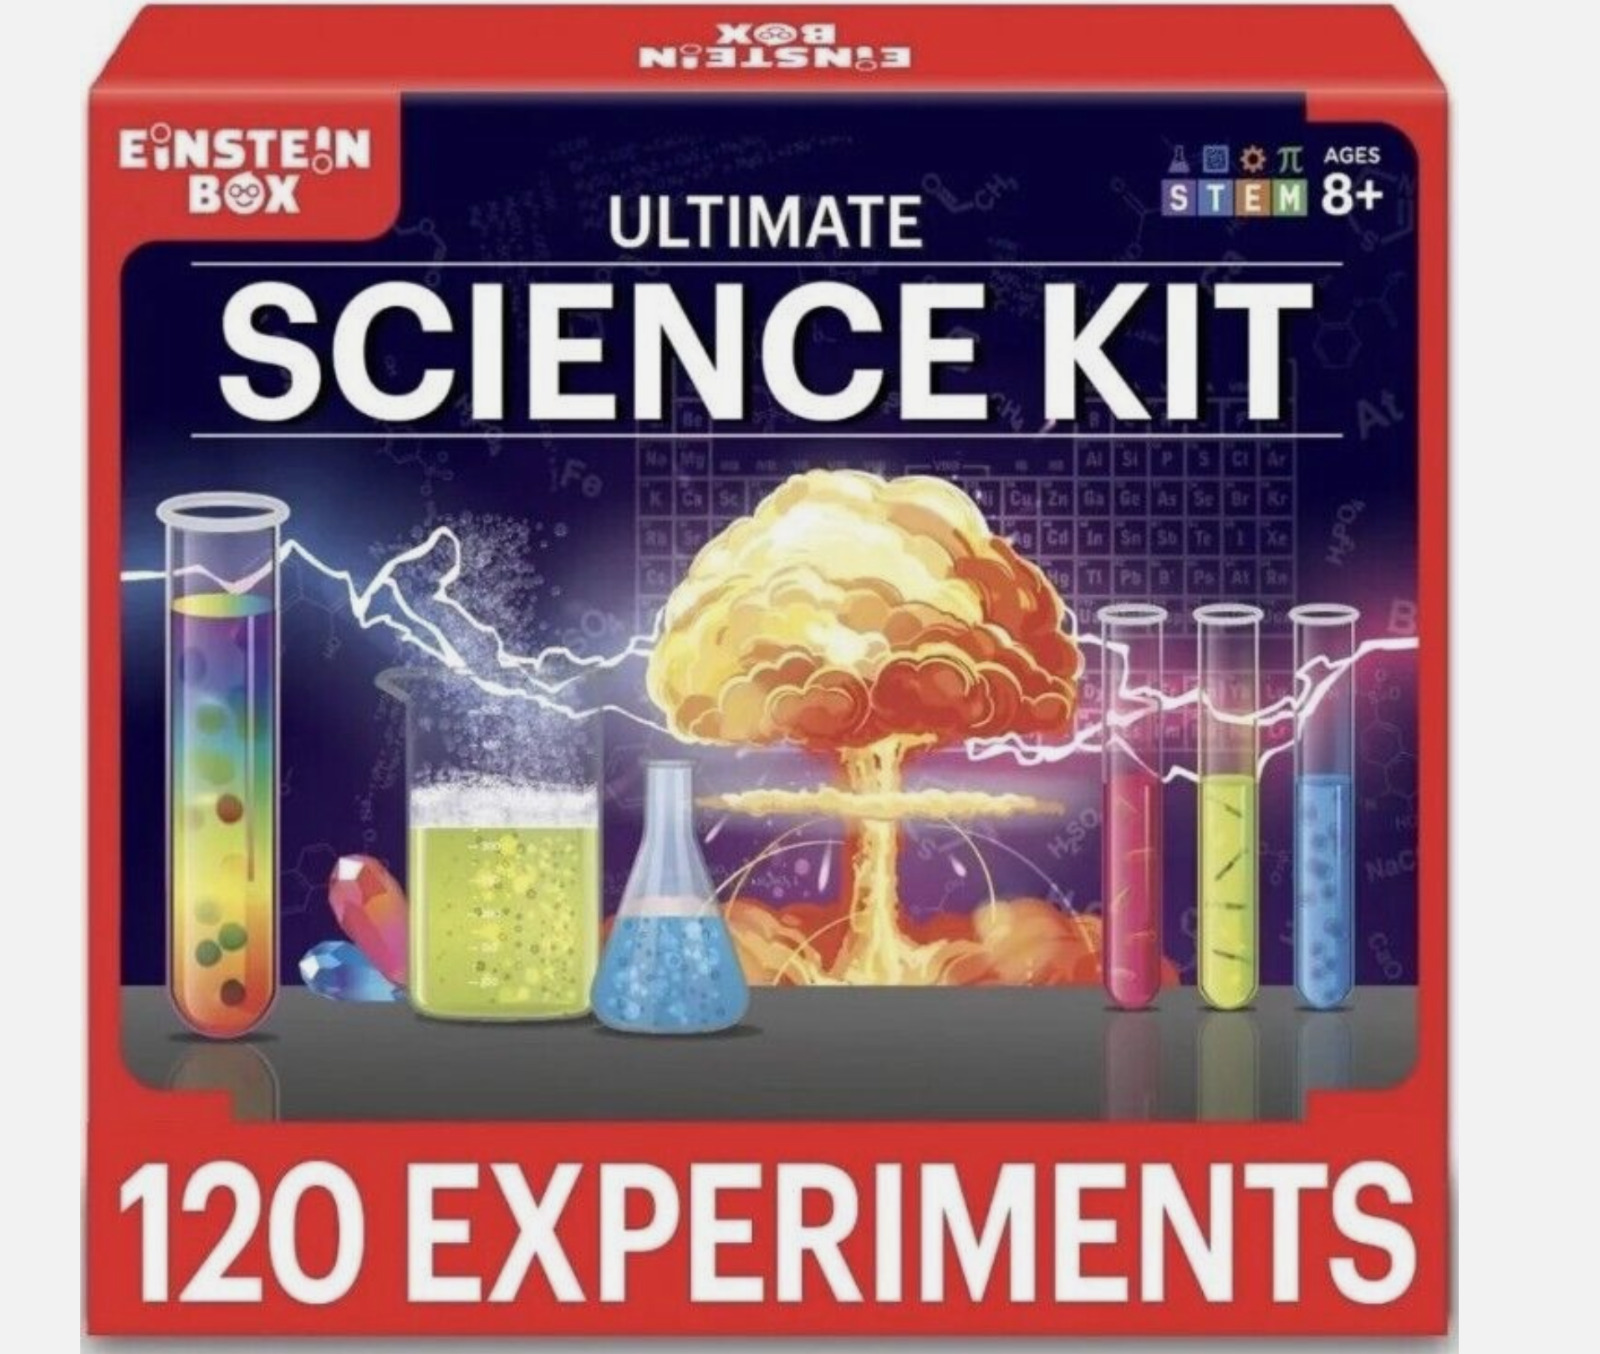 NEW EINSTEIN BOX ULTIMATE SCIENCE KIT 120 EXPERIMENTS FOR KIDS STEM